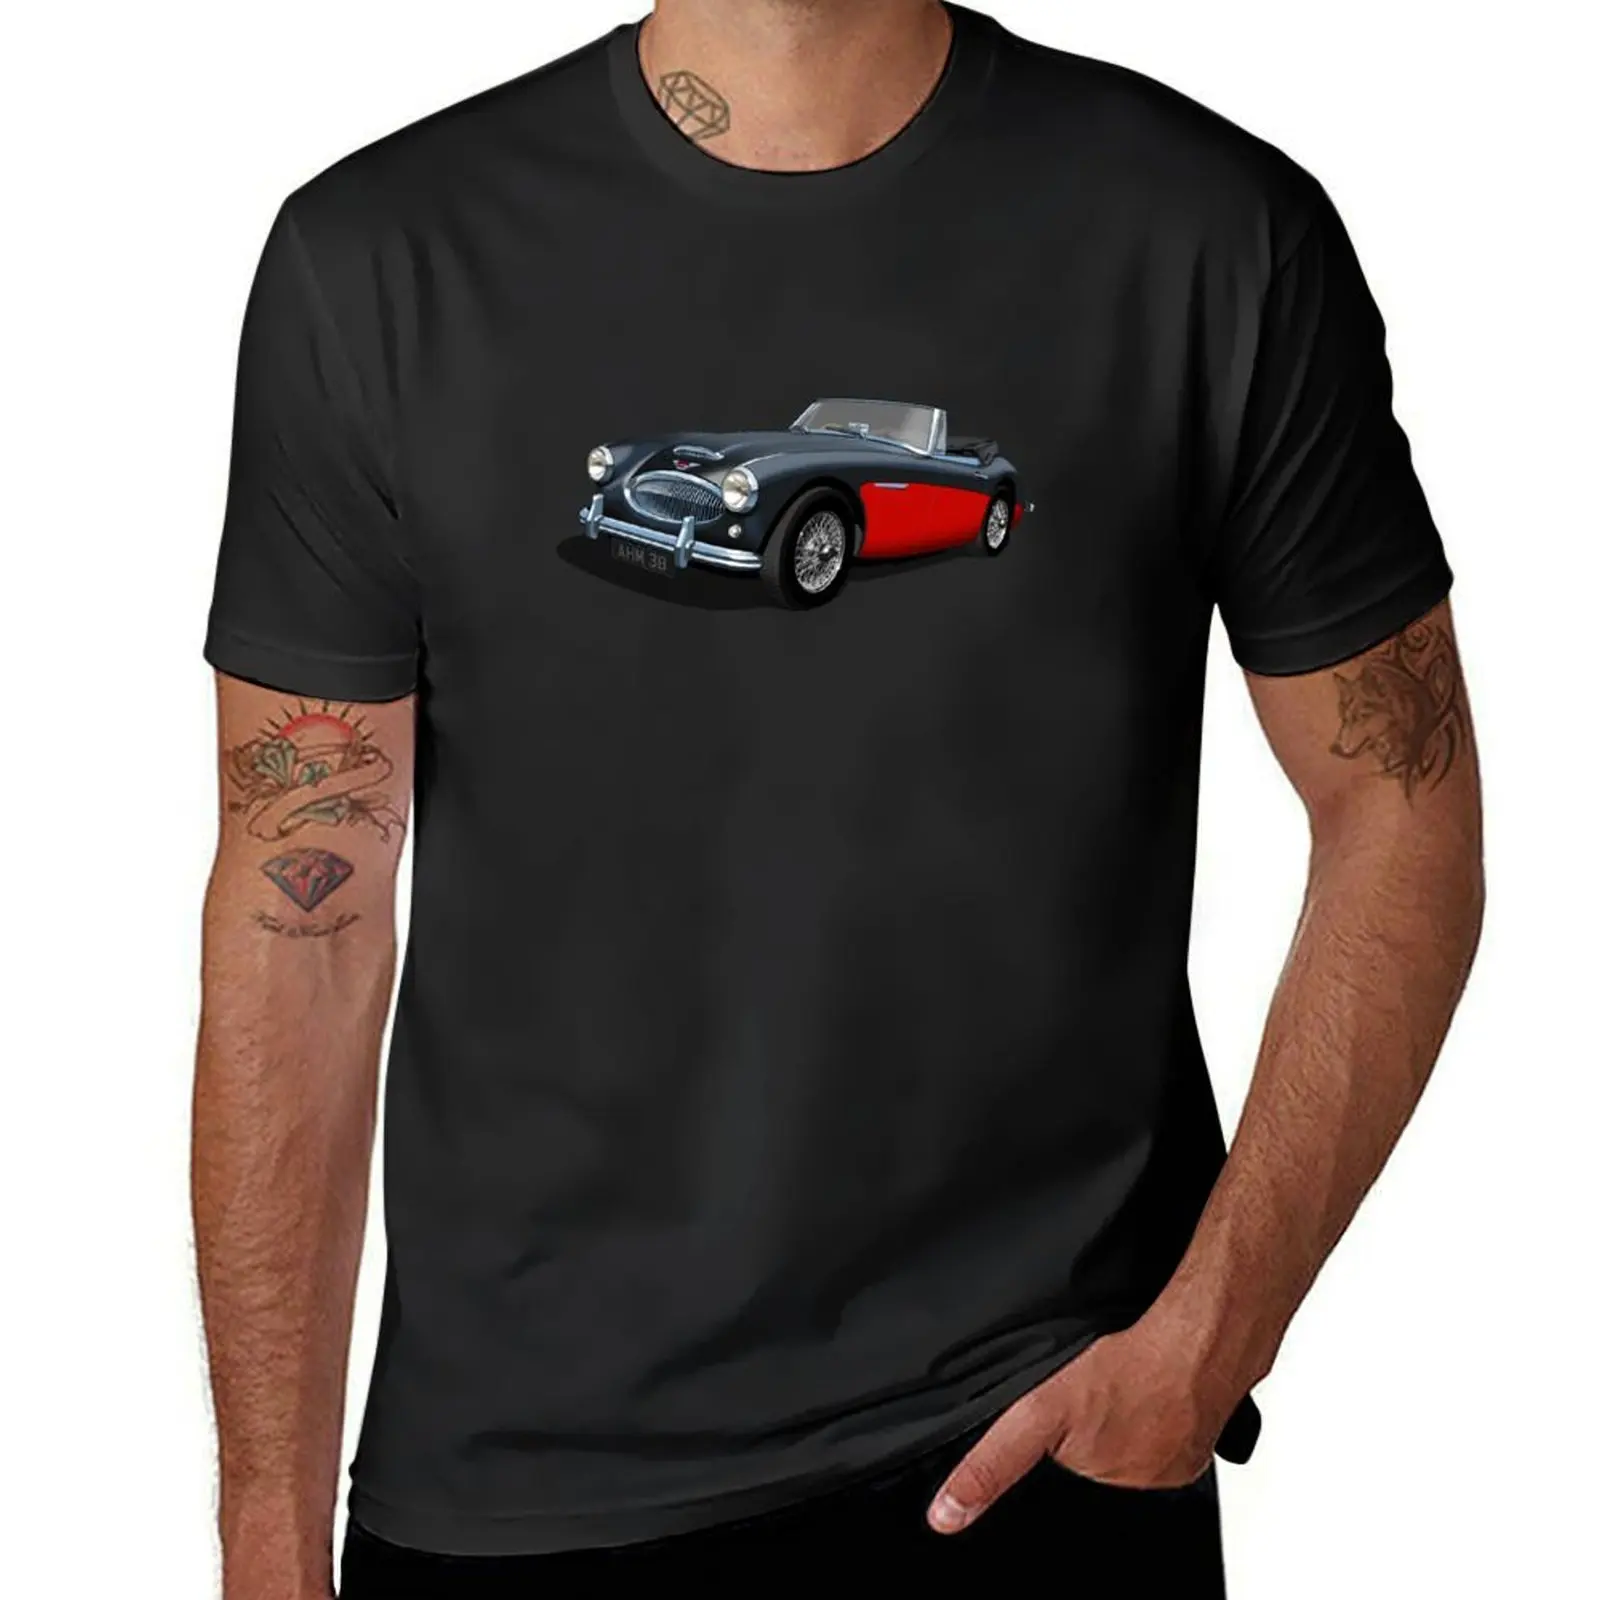 

Austin Healey 3000 Mk3 in black and red T-Shirt blanks anime boys animal print sports fans mens t shirt graphic